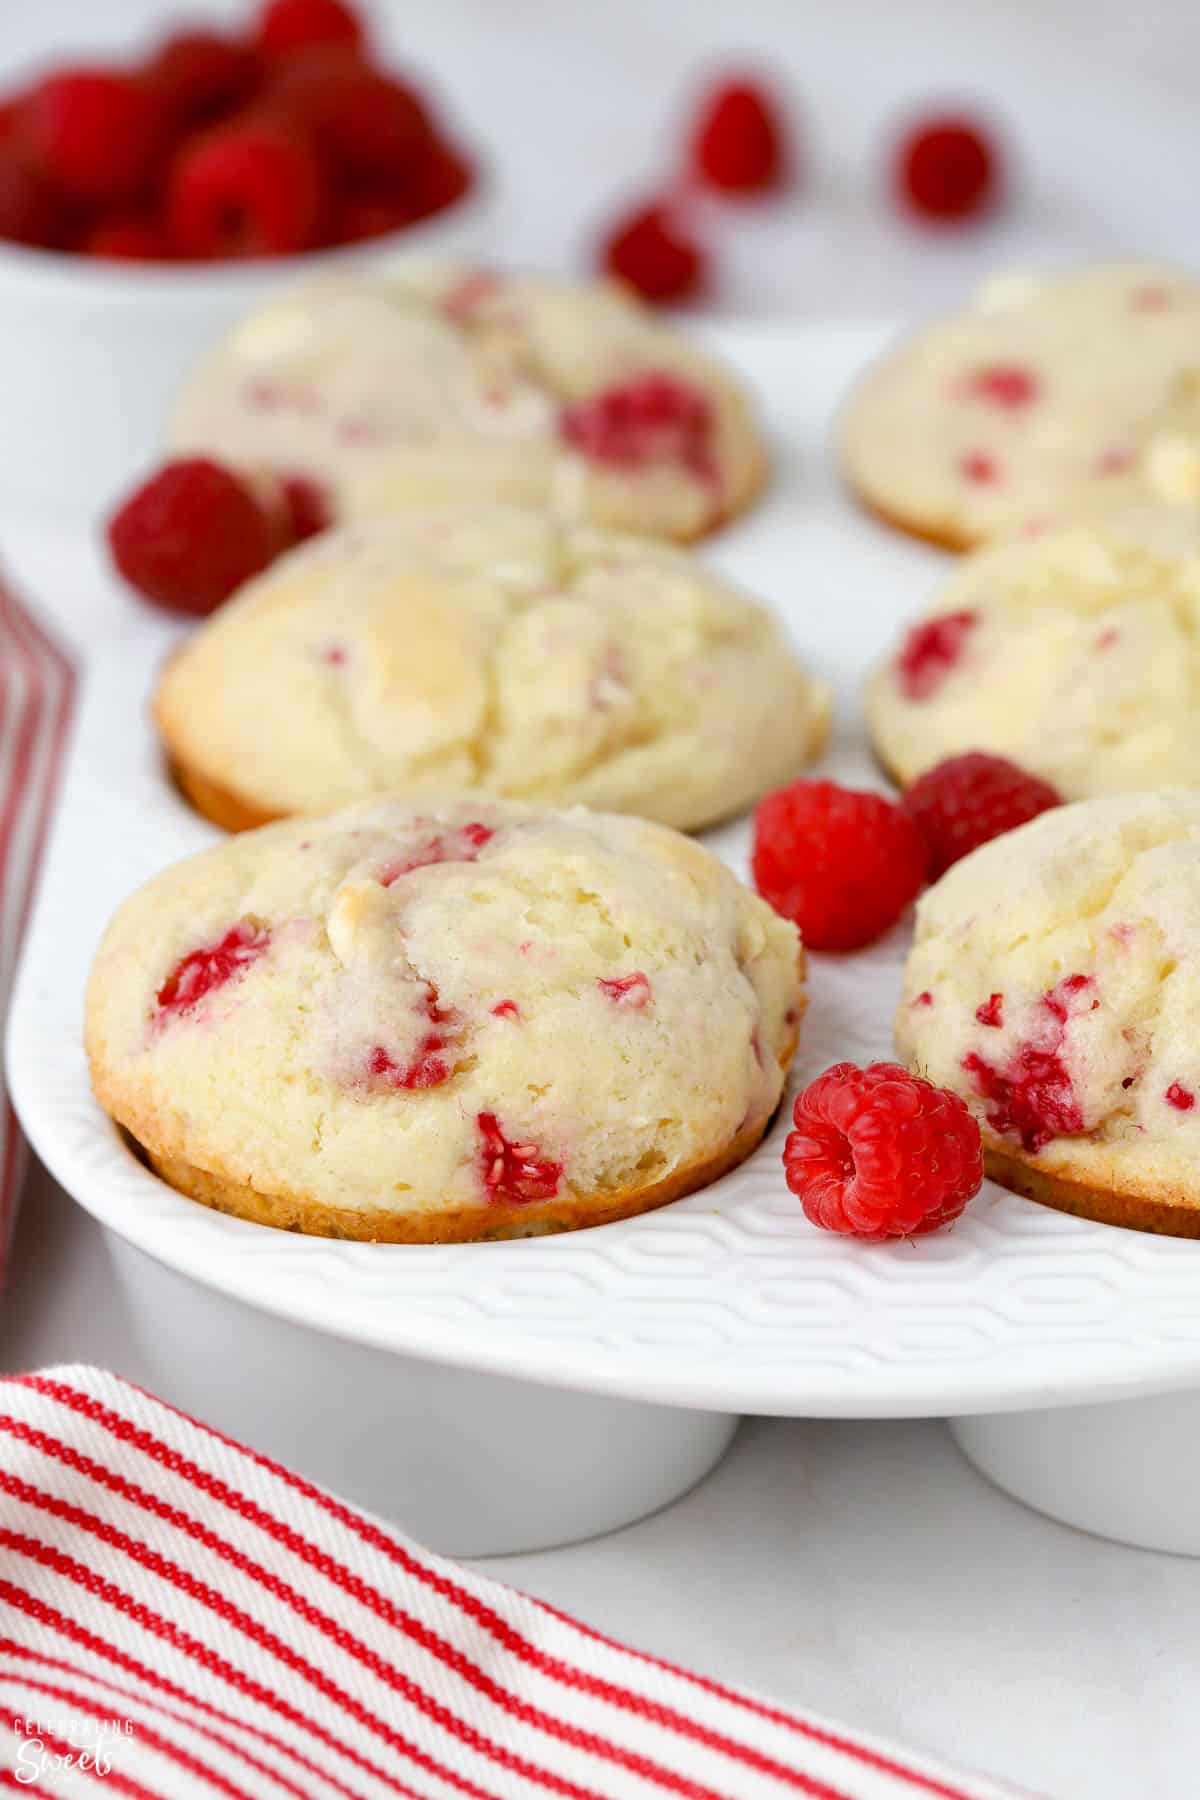 Raspberry muffins in a white baking dish surrounded by fresh raspberries.